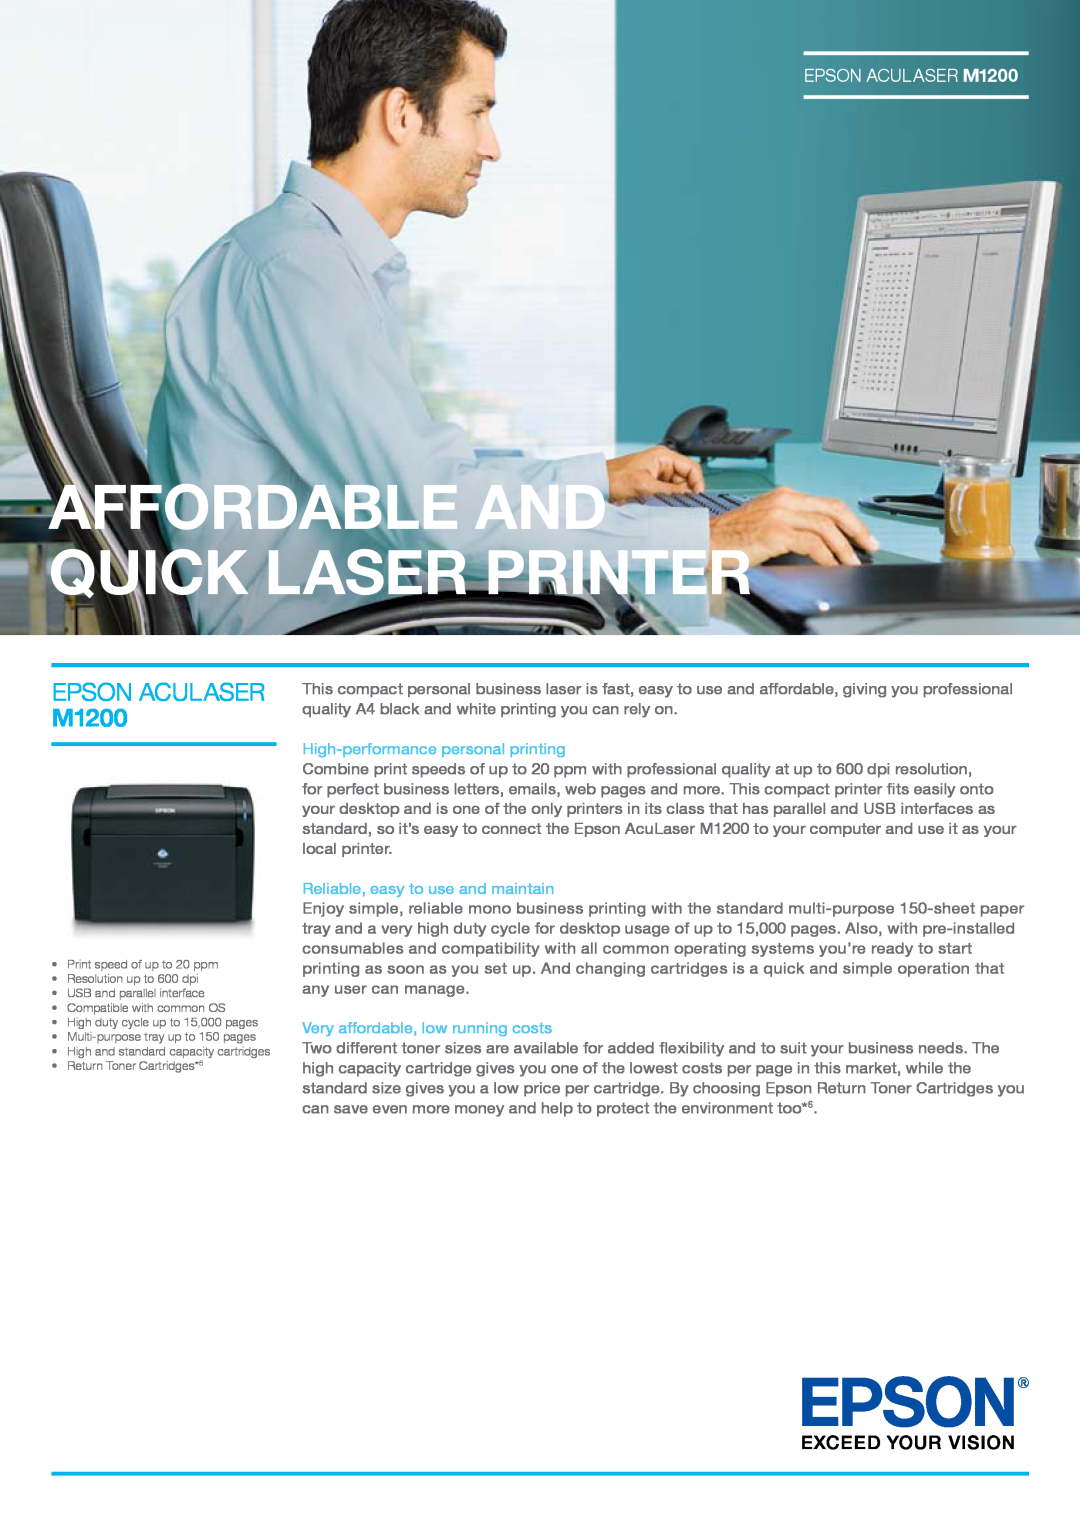 Epson manual Affordable And Quick Laser Printer, Epson Aculaser, EPSON ACULASER M1200 